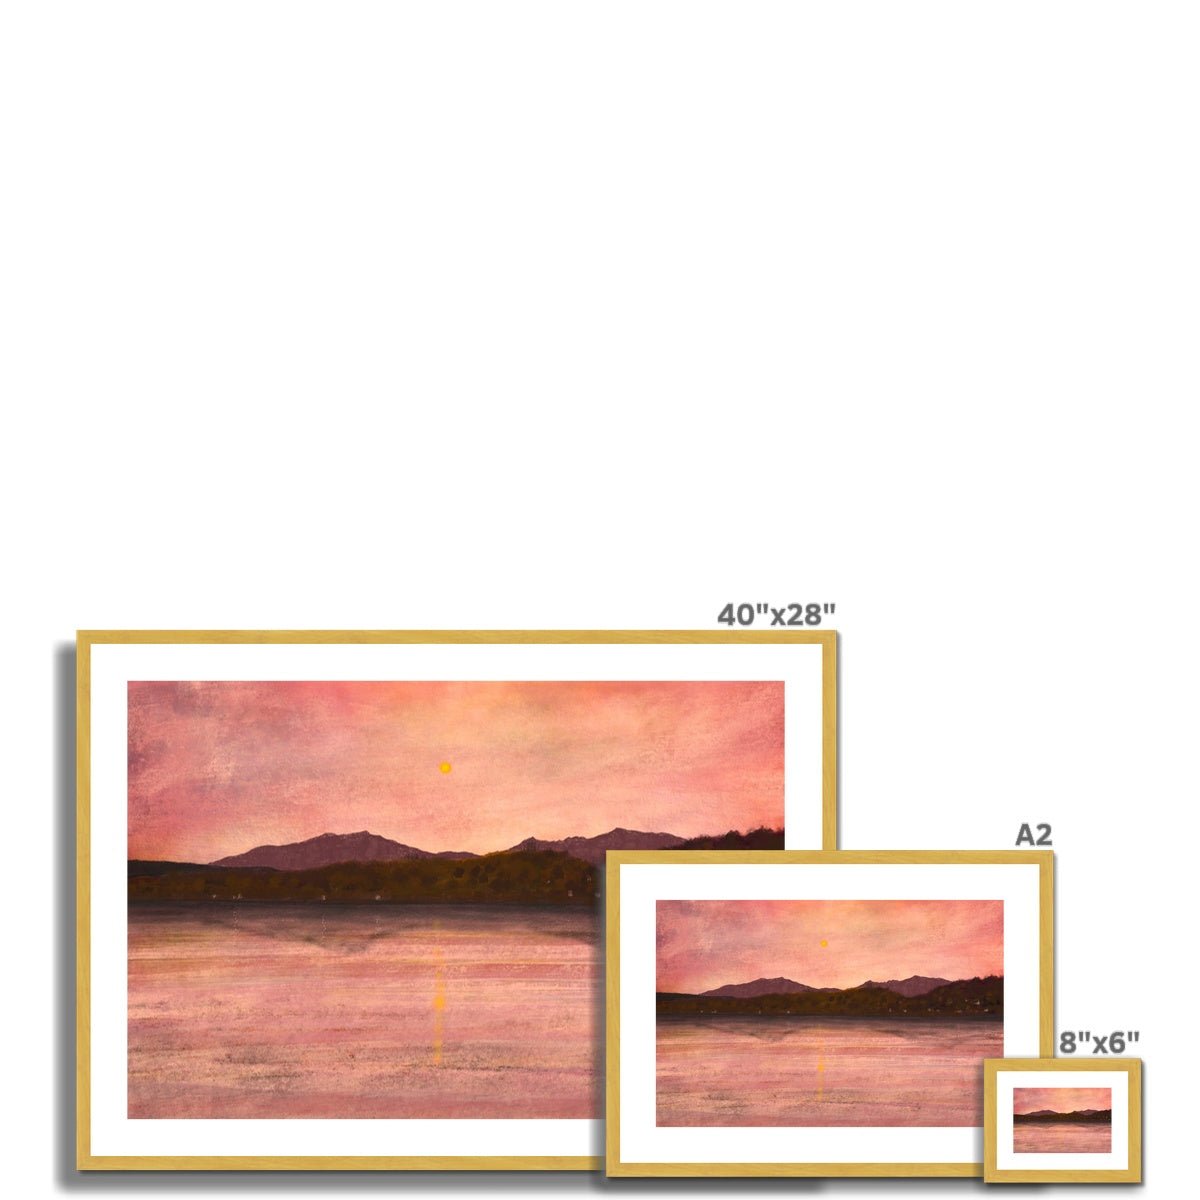 Dusk Over Arran & Bute Painting | Antique Framed & Mounted Prints From Scotland-Antique Framed & Mounted Prints-Arran Art Gallery-Paintings, Prints, Homeware, Art Gifts From Scotland By Scottish Artist Kevin Hunter